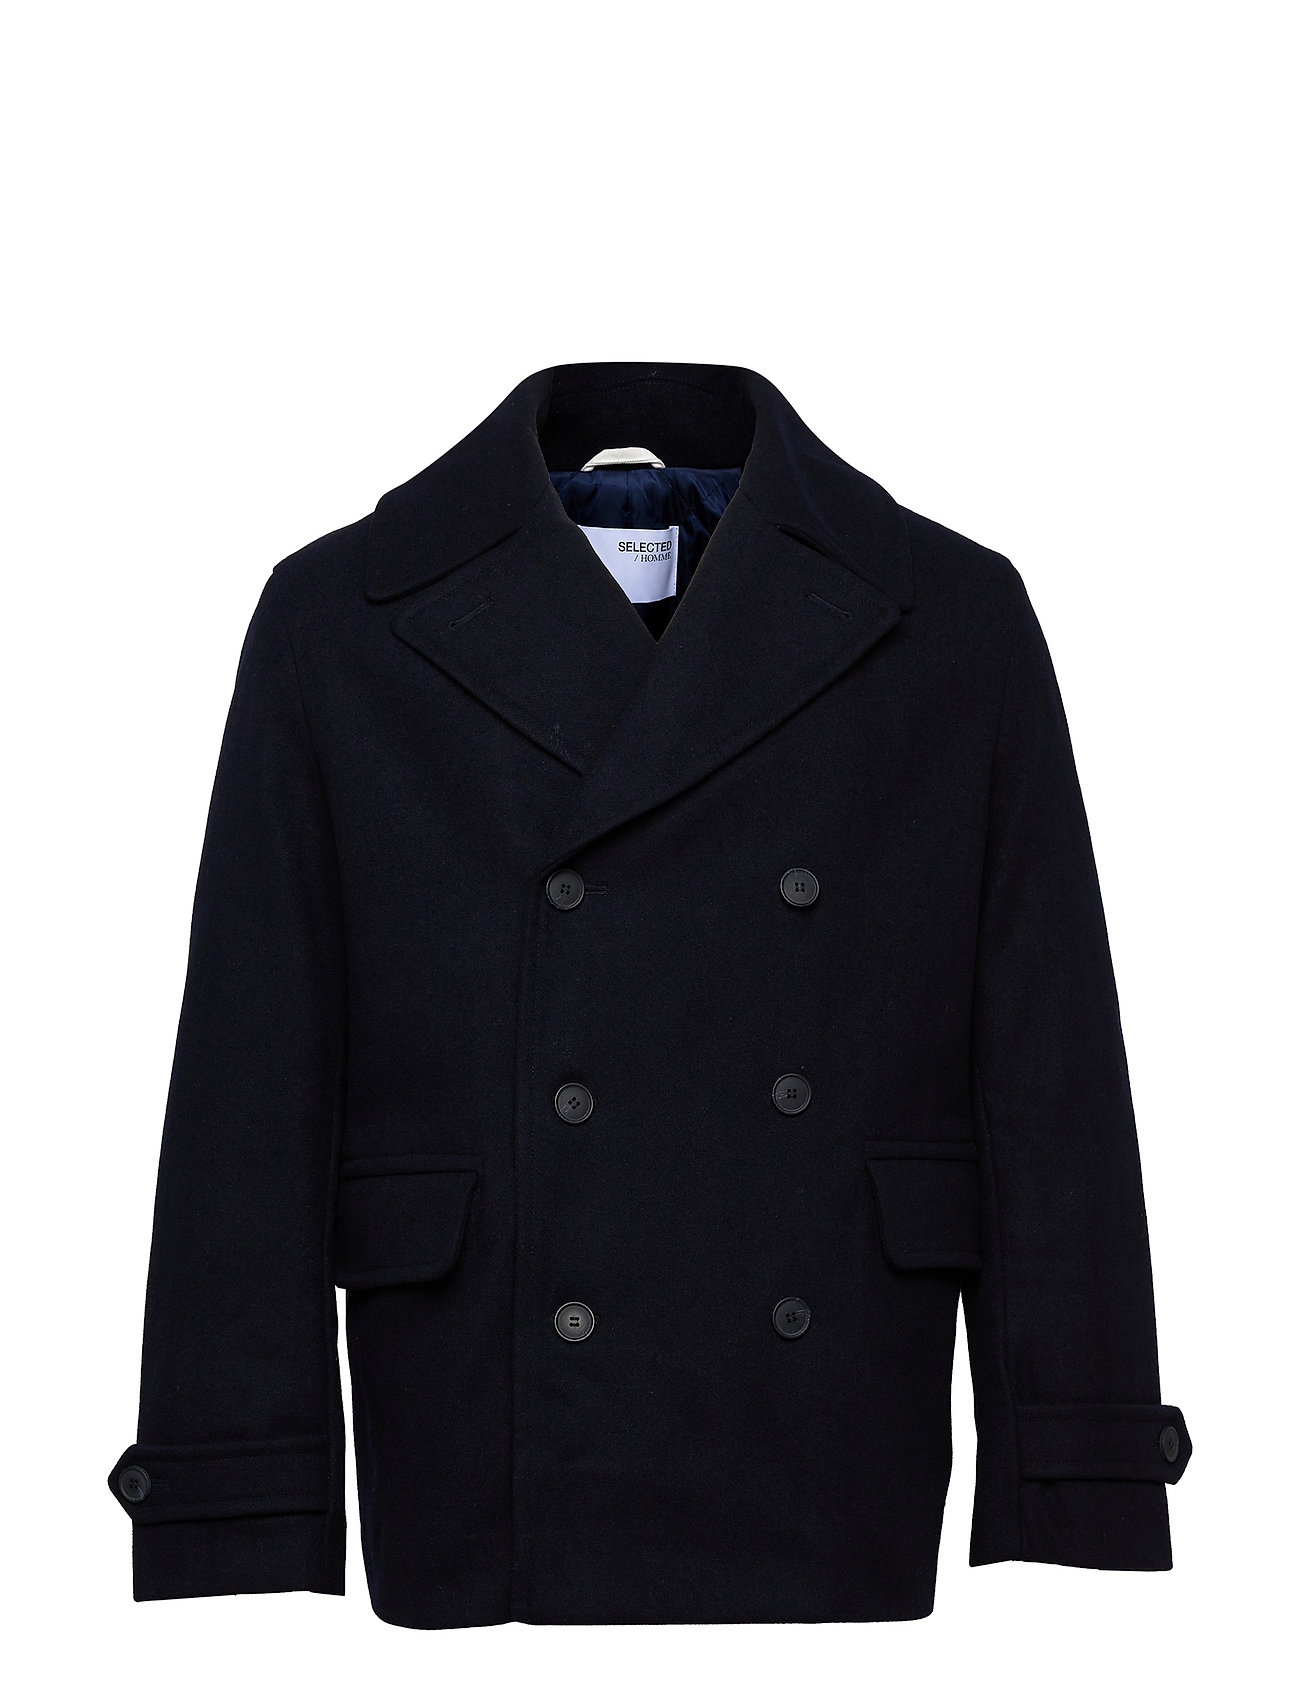 Selected Homme Slhnelson Peacoat U - 169.99 €. Buy Winter Coats from Selected  Homme online at Boozt.com. Fast delivery and easy returns